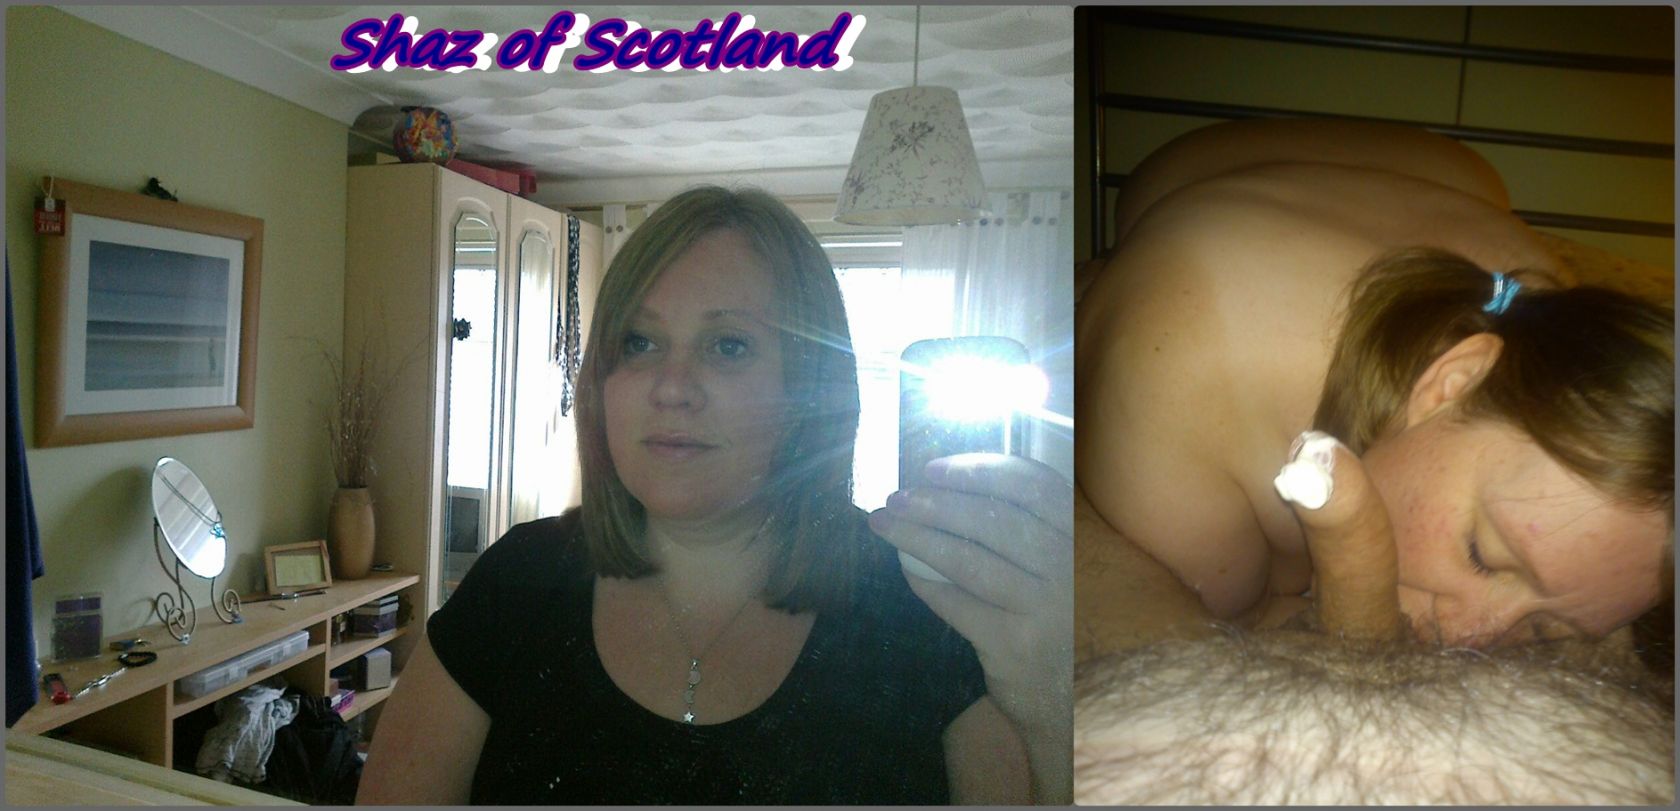 Shaz of Scotland with cock